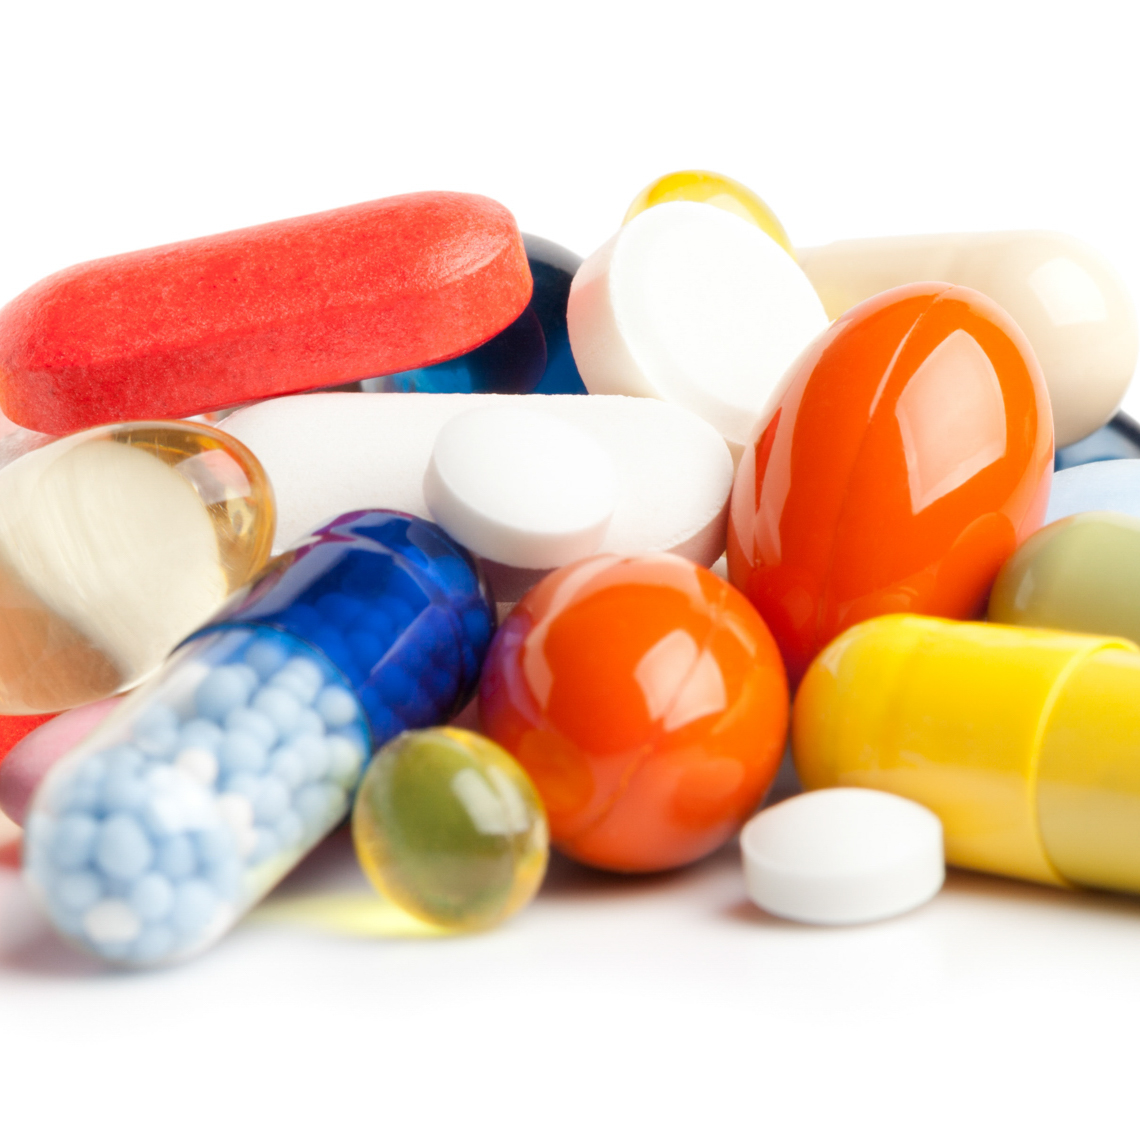 drug tablets in a colorful pile